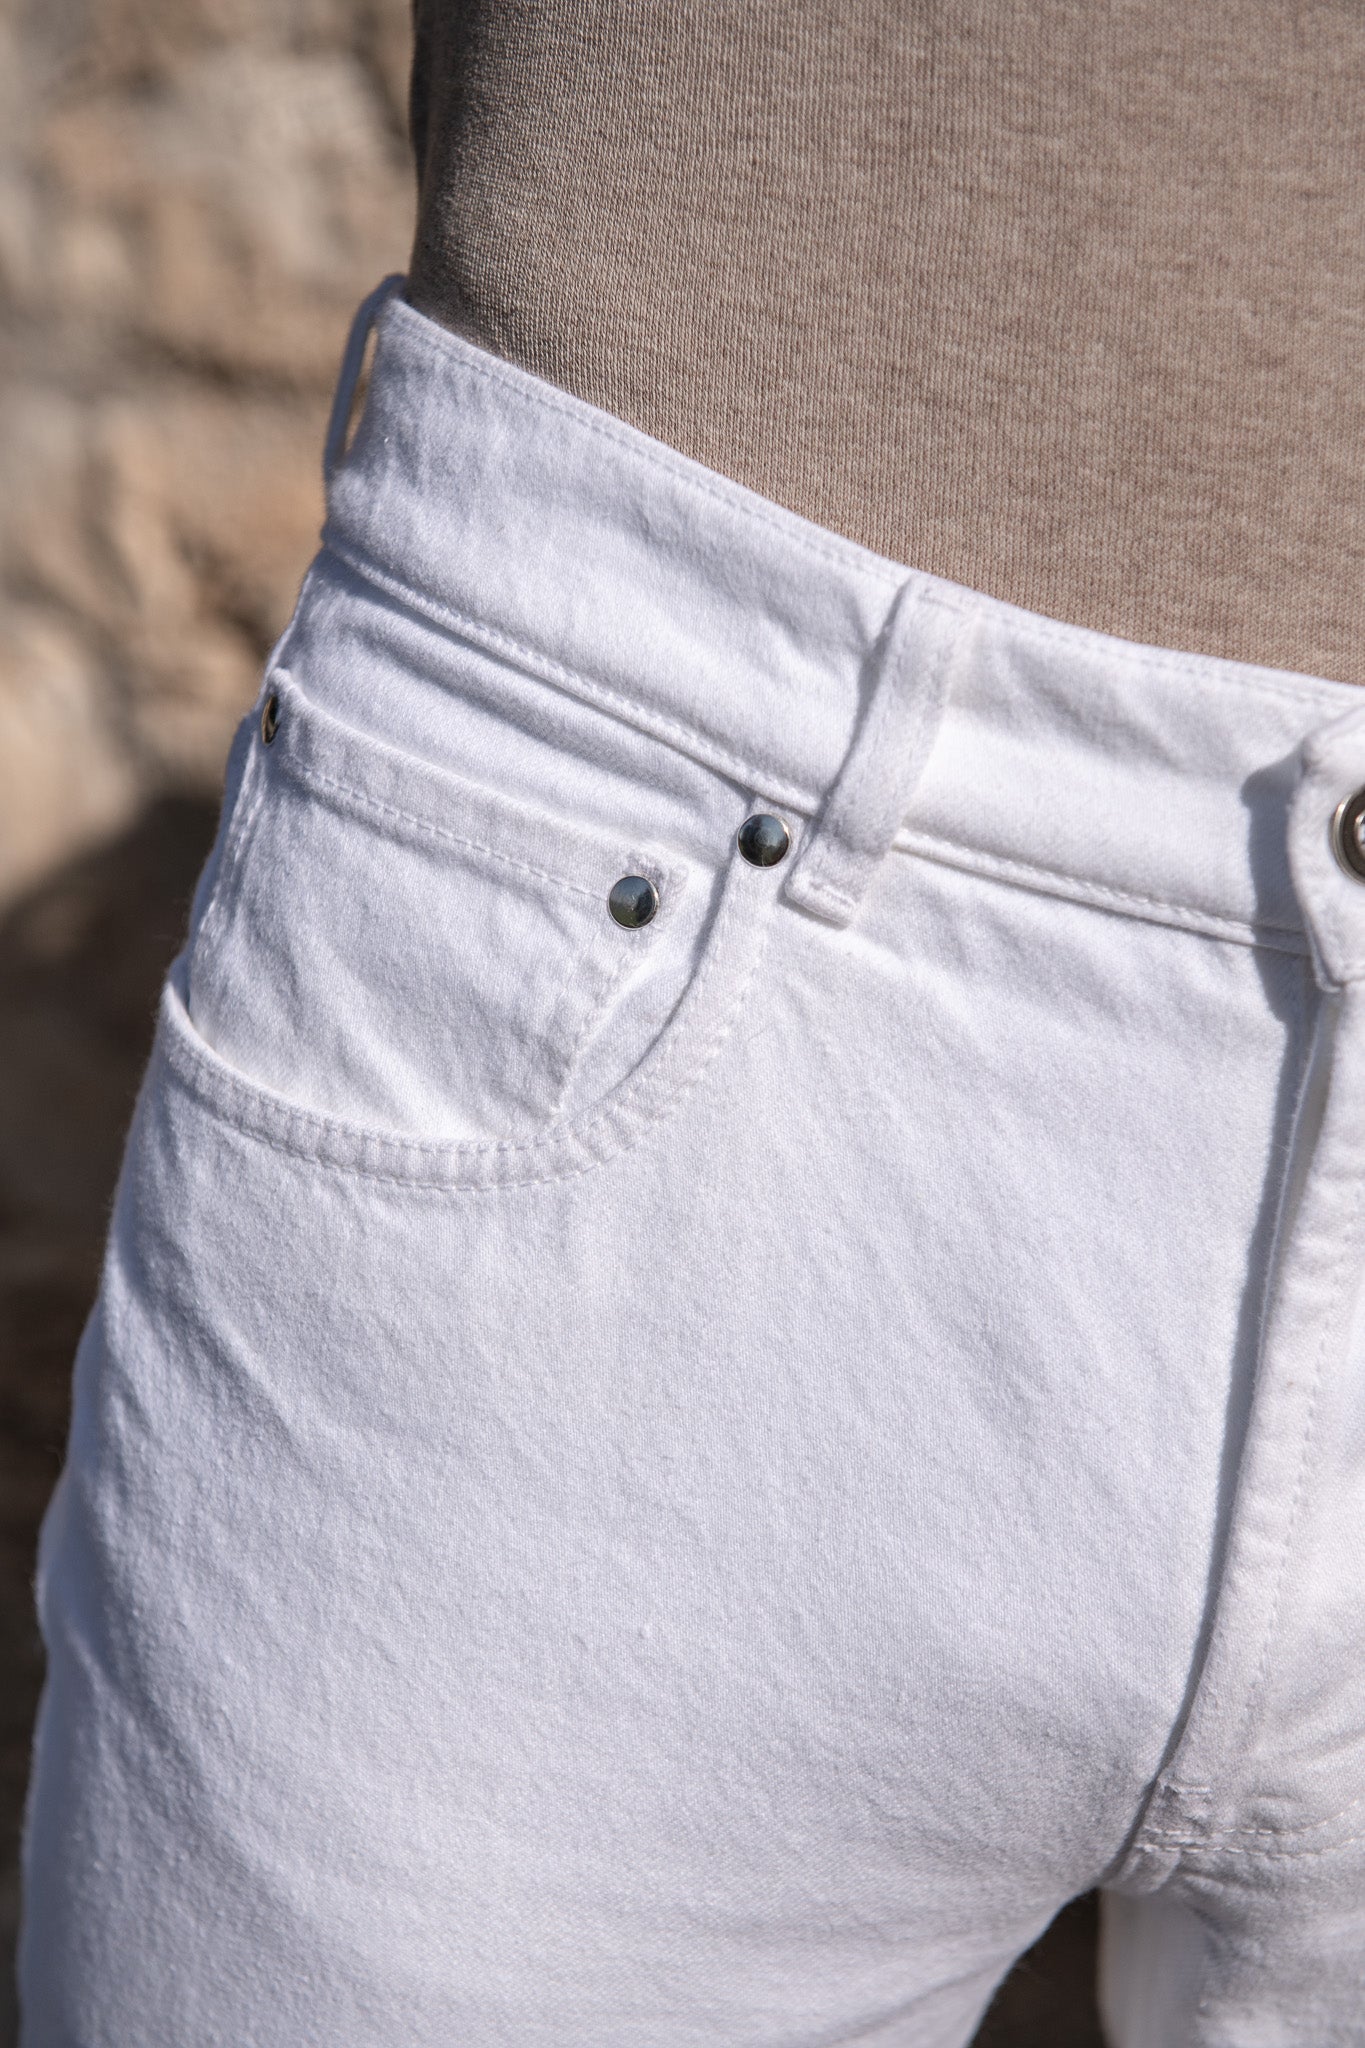 White jeans - Candiani cotton - Made in Italy